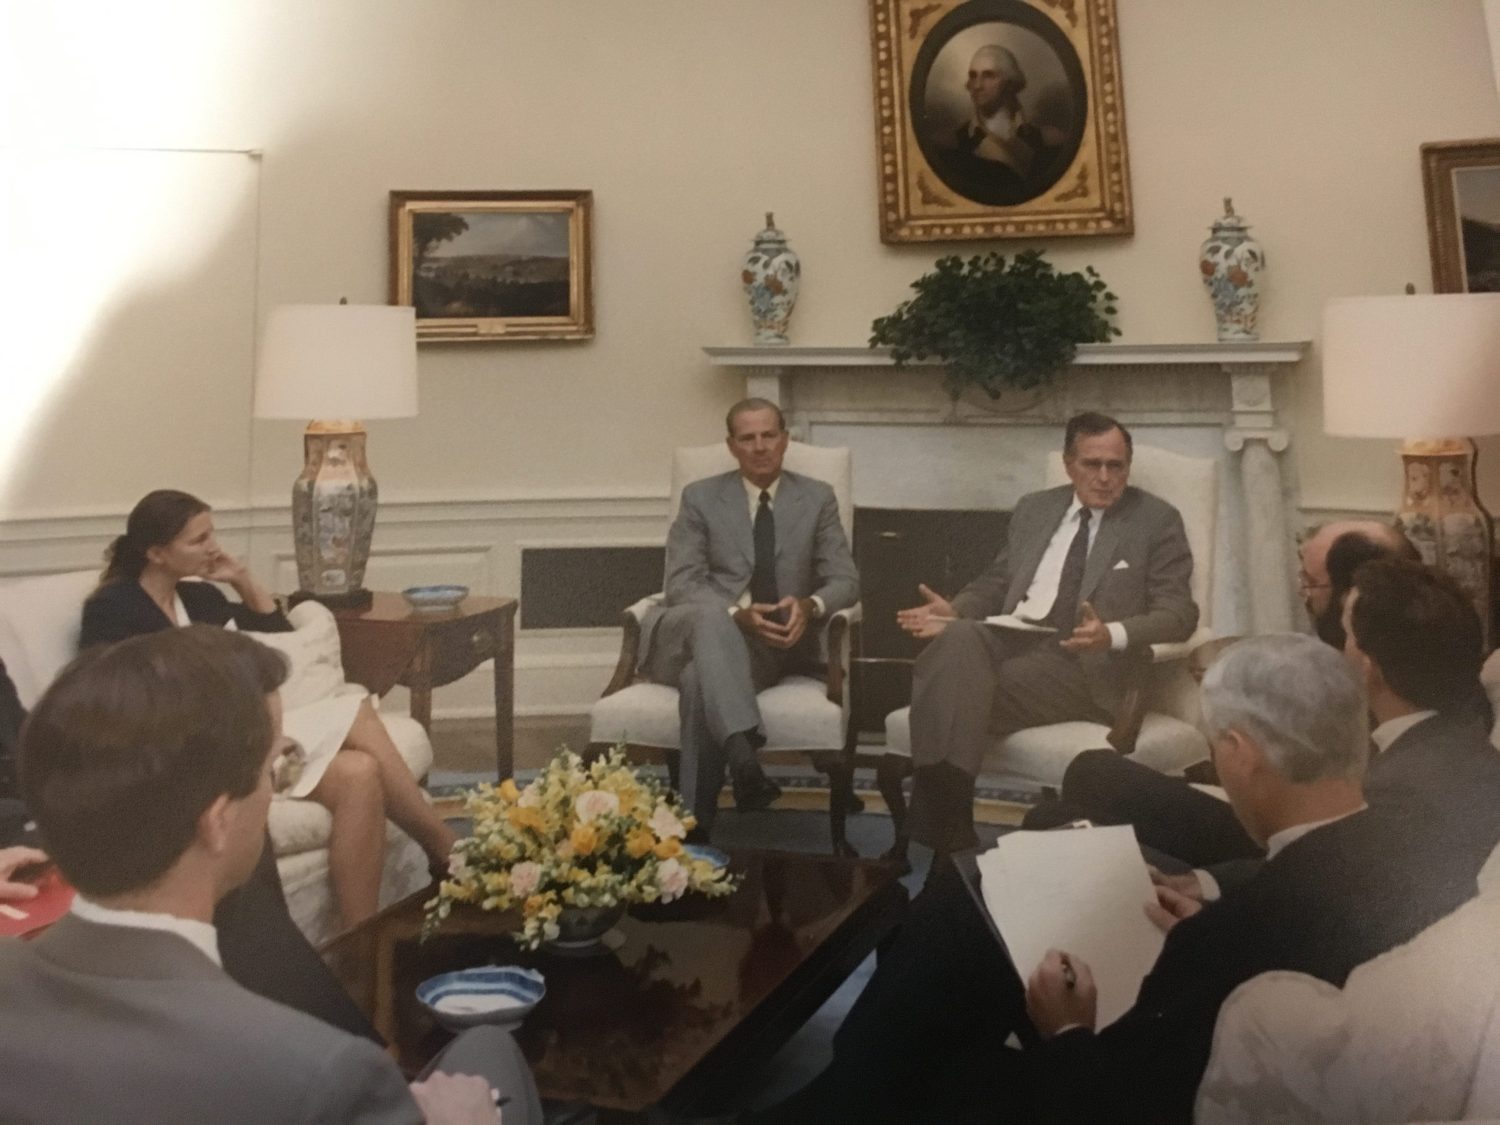 President George H.W. Bush leads a discussion about Iraqi President Saddam Hussein in the Oval Office in the fall of 1990. CIA Officer Bruce Riedel is responding to the president.